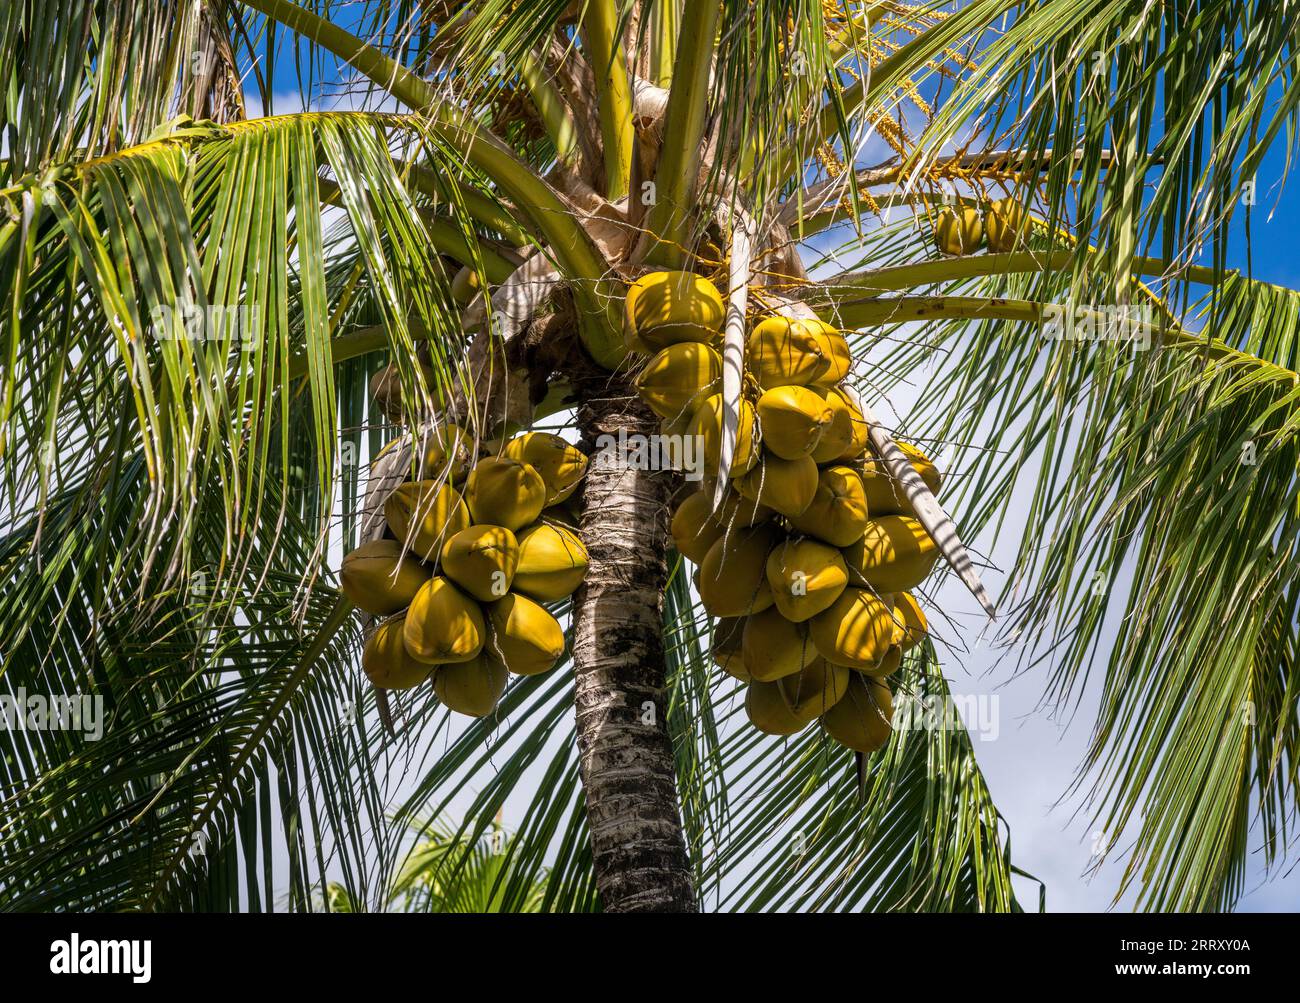 Many yellow coconuts growing in bunches under the fronds of large coconut palm tree on Kauai Stock Photo